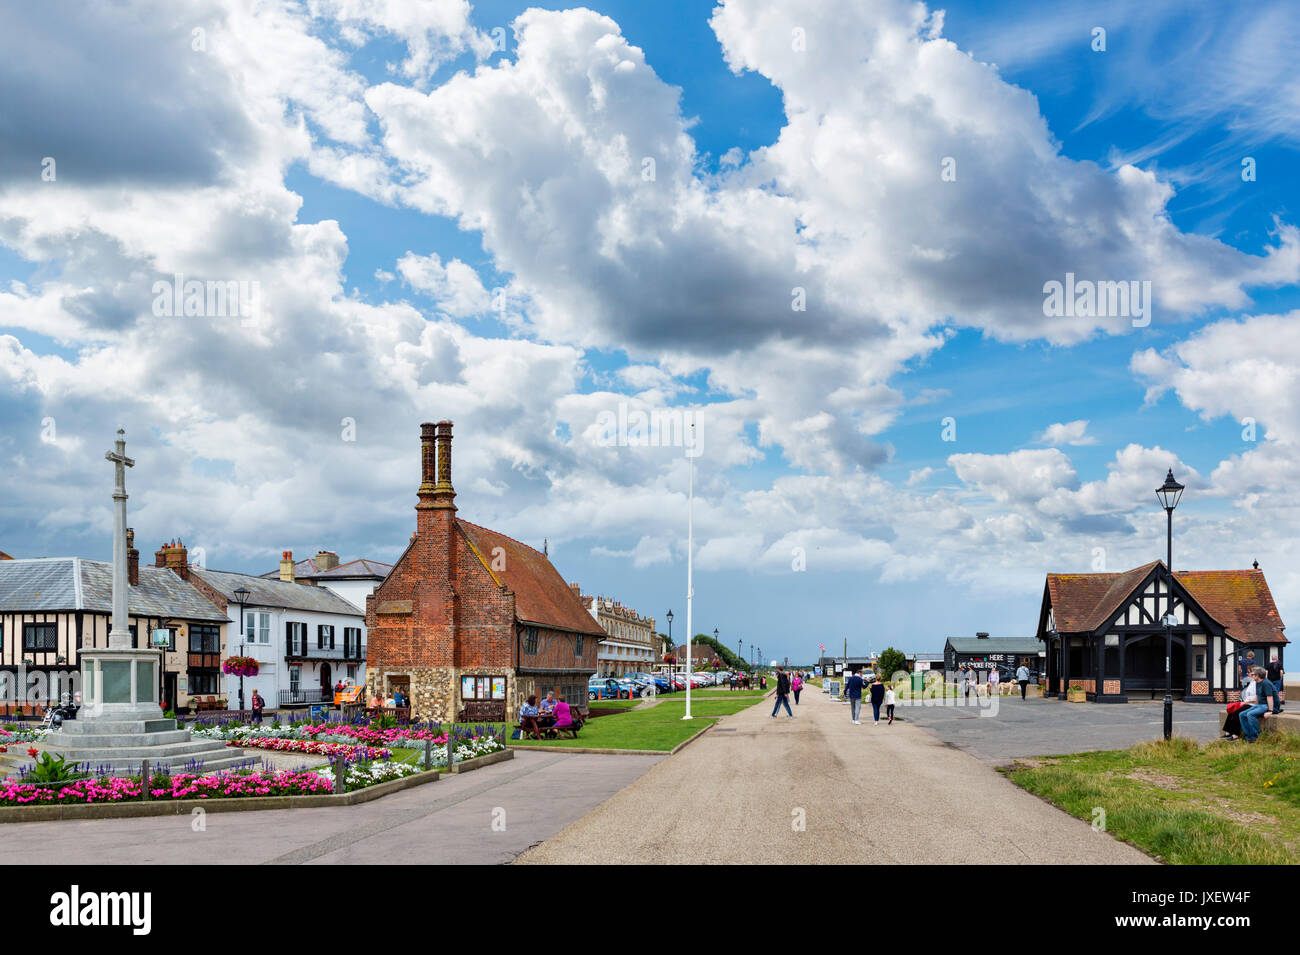 Seafront promenade with the Moot Hall to the left, Aldeburgh, Suffolk, England, UK Stock Photo